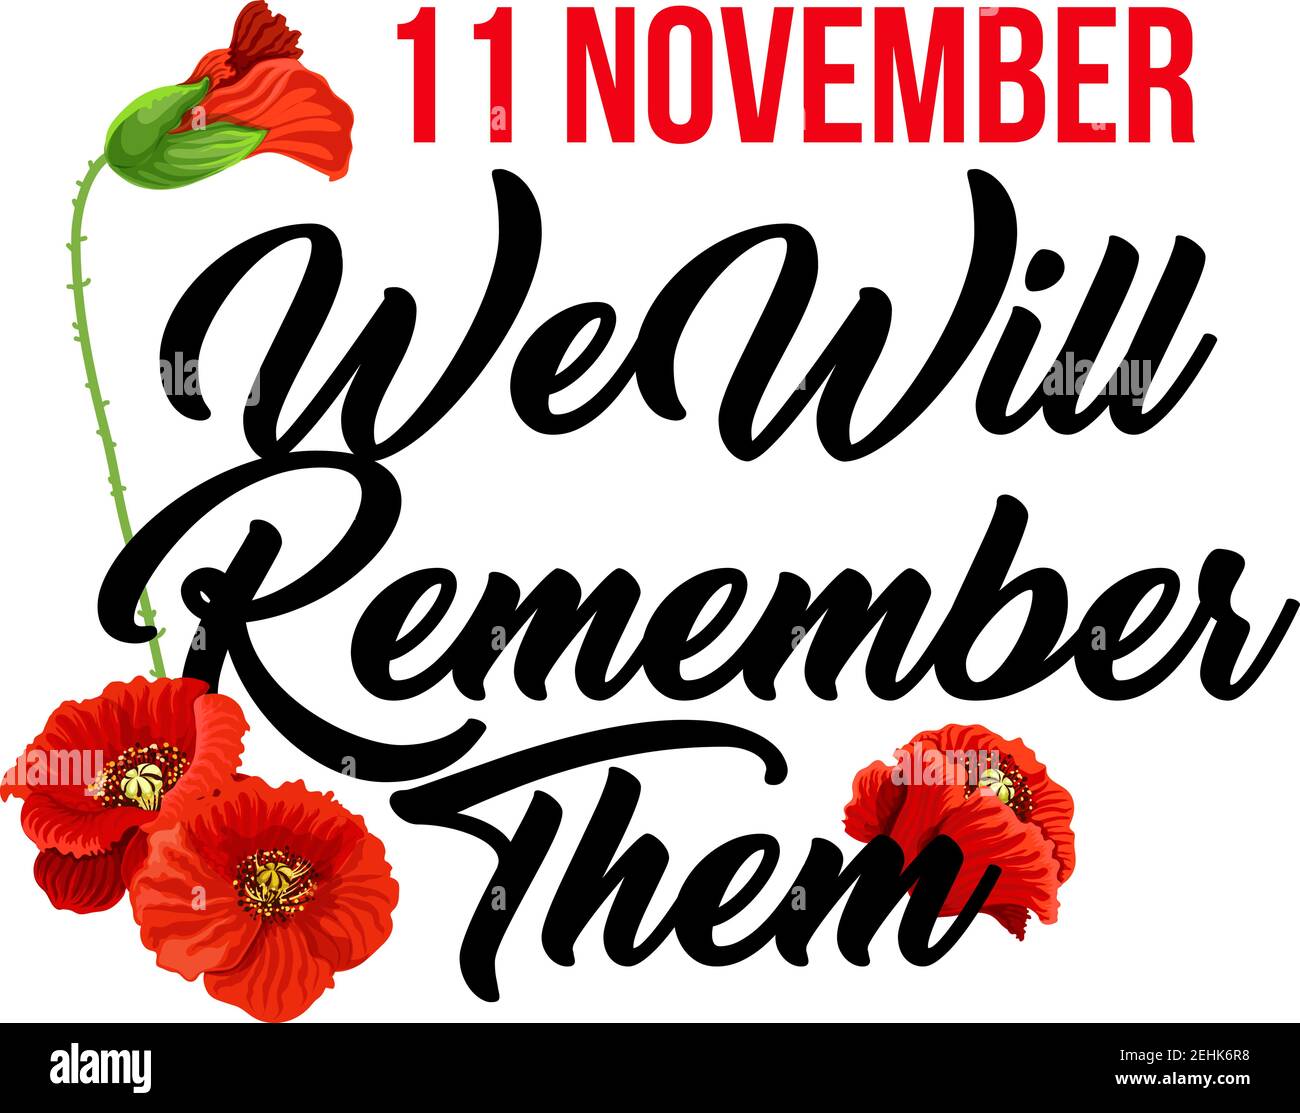 Creative design for Remembrance day 11 November. Vector with red poppies isolated on white background. Veterans day and tribute for soldiers concept. Stock Vector